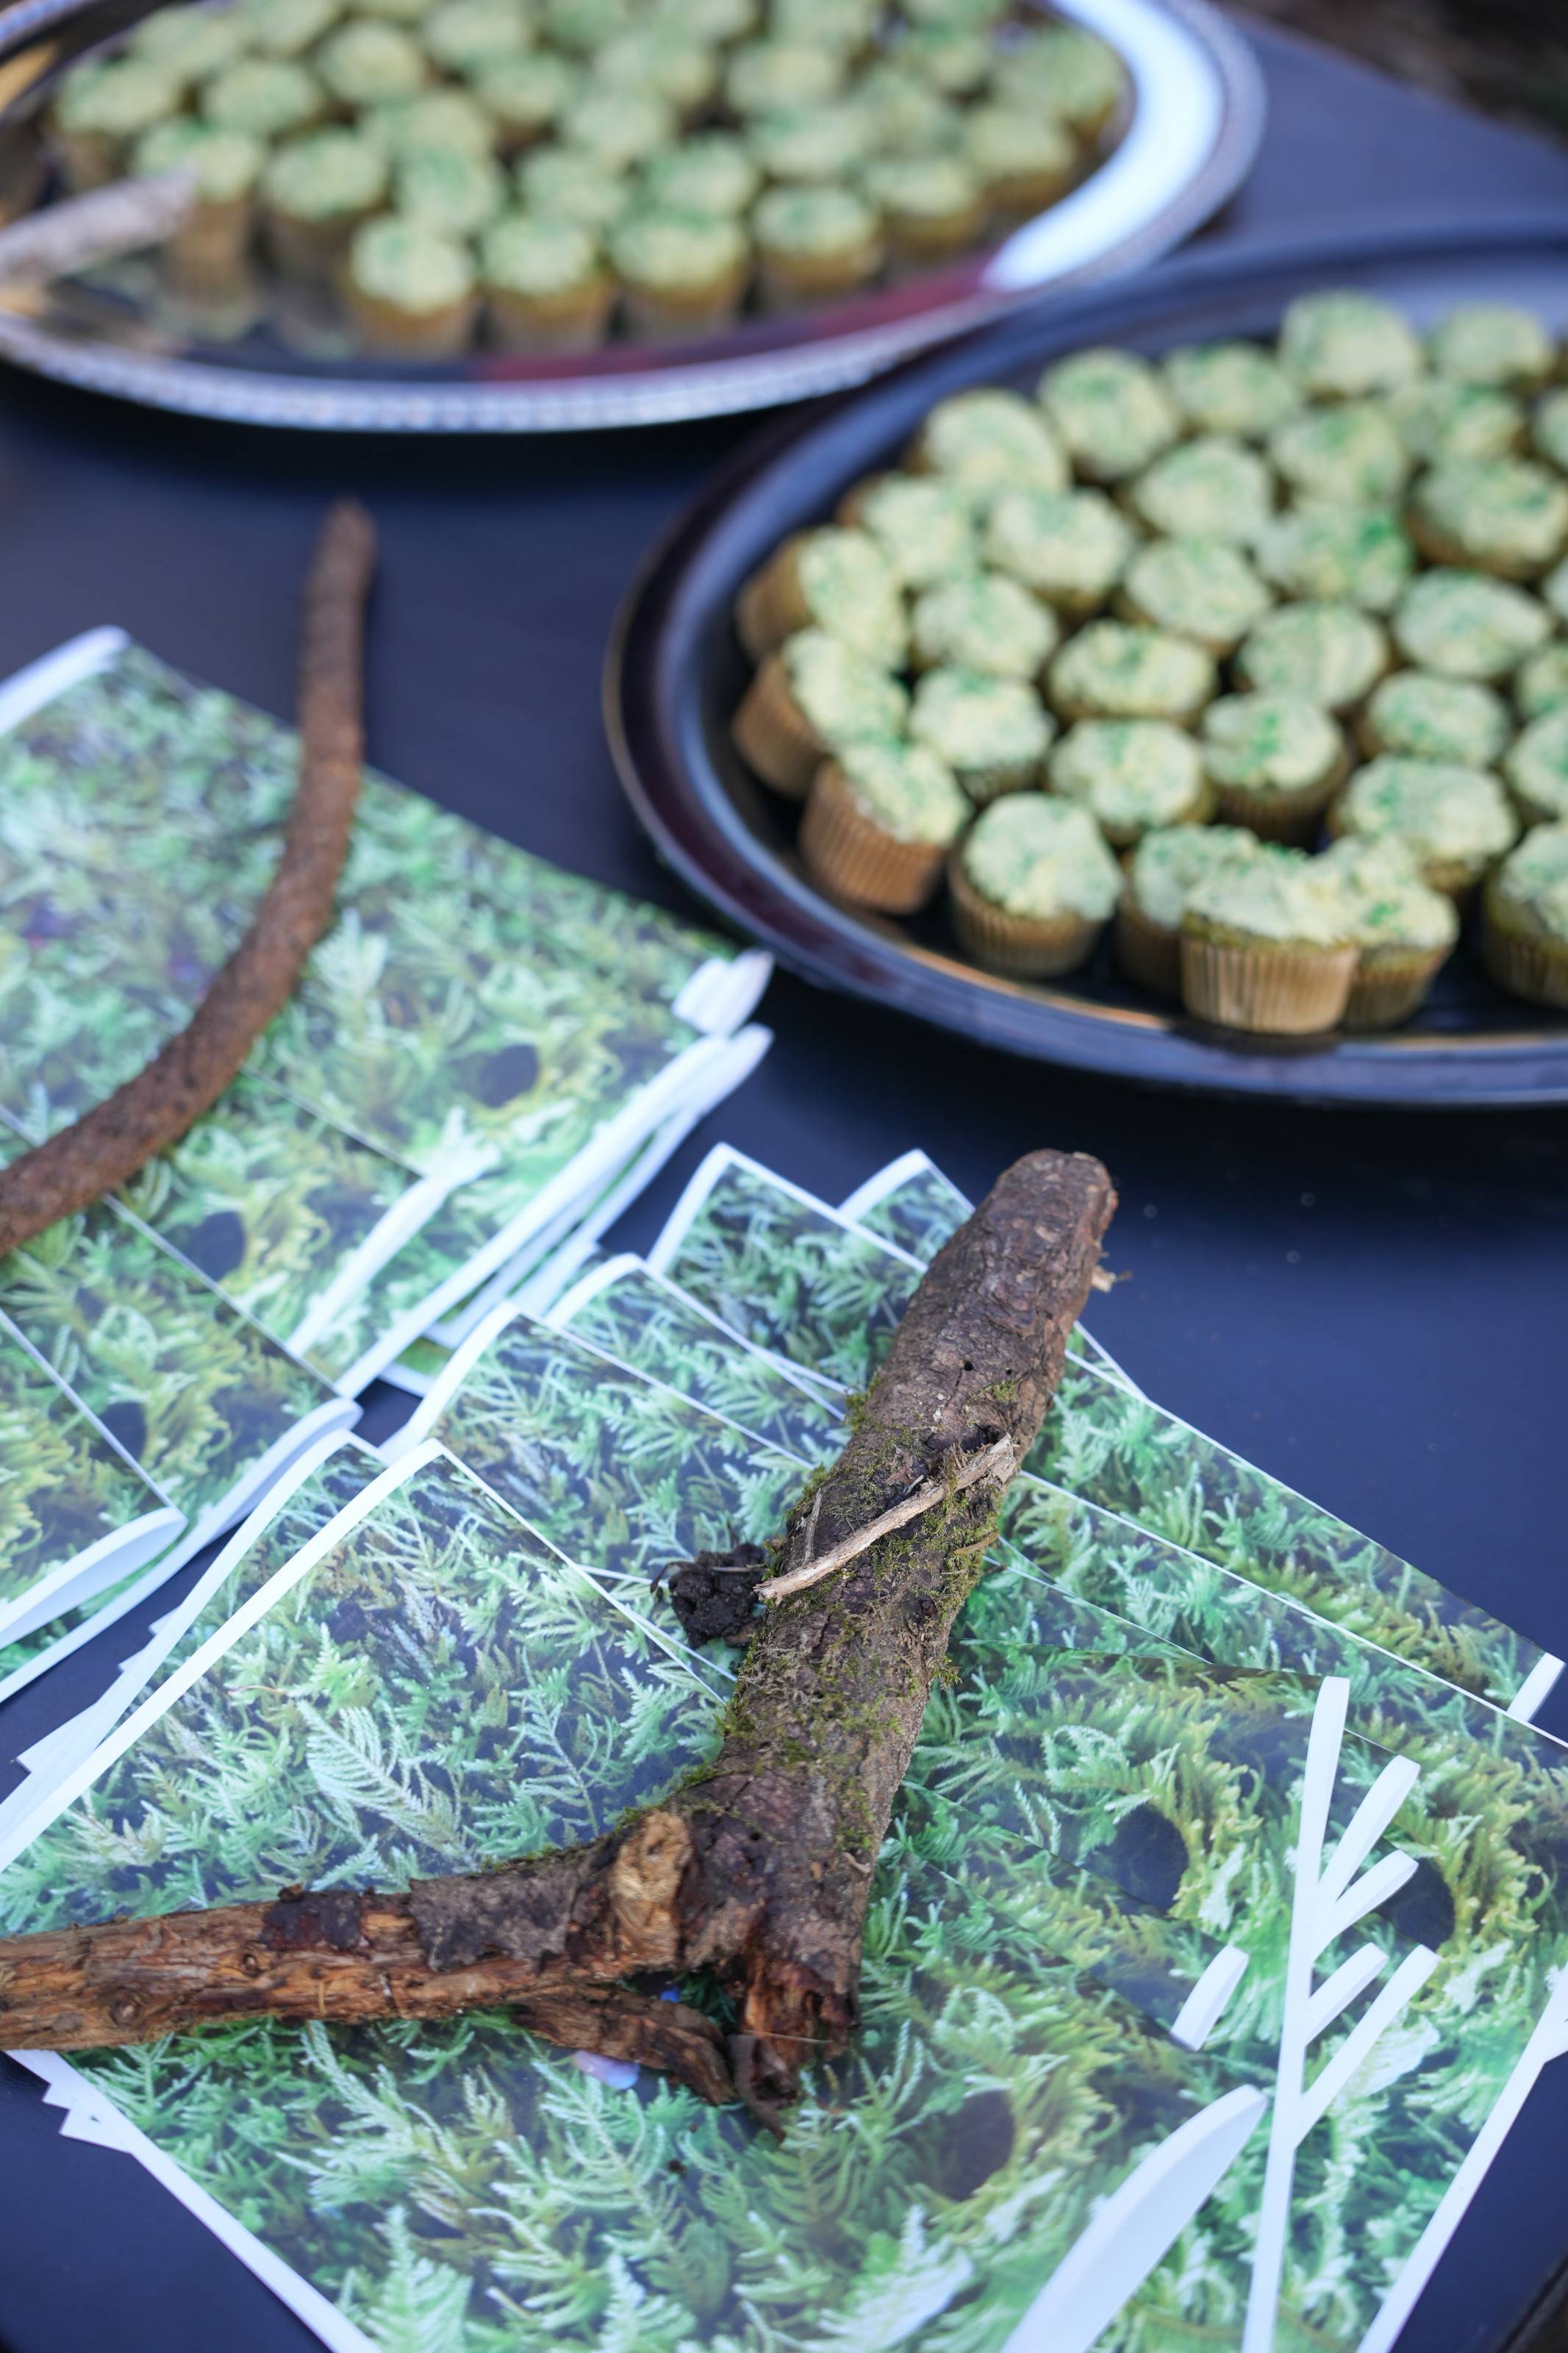 A close-up of green pamphlets and cupcakes.